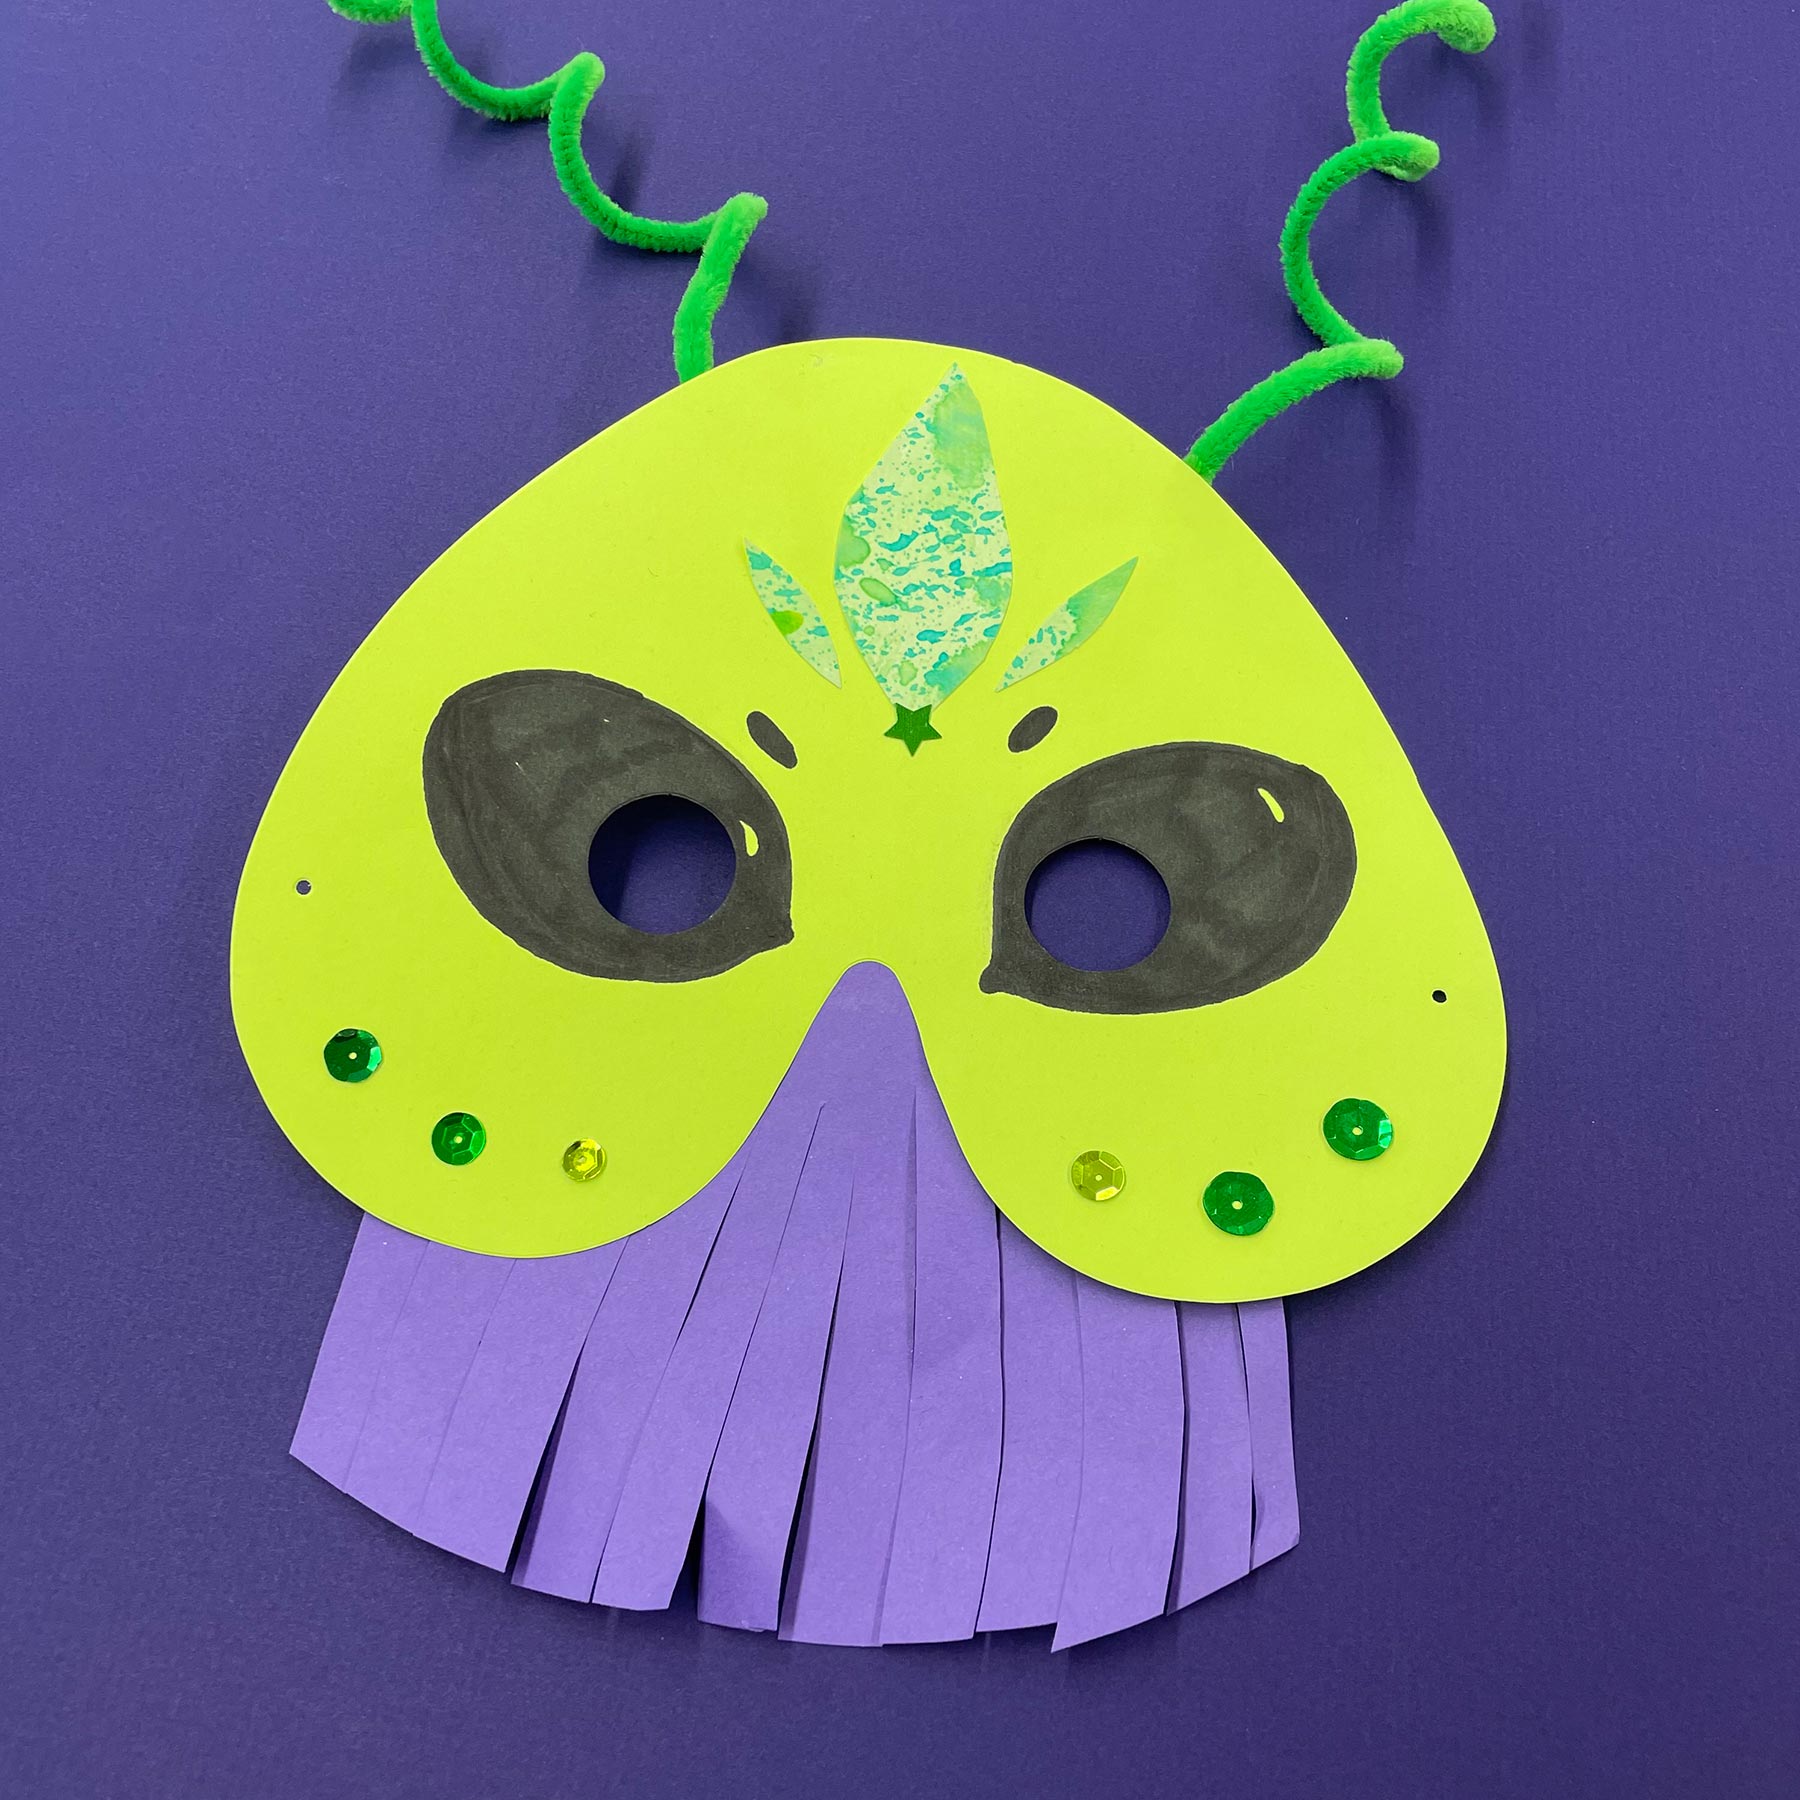 Green and purple paper mask shaped like a fantastical alien creature